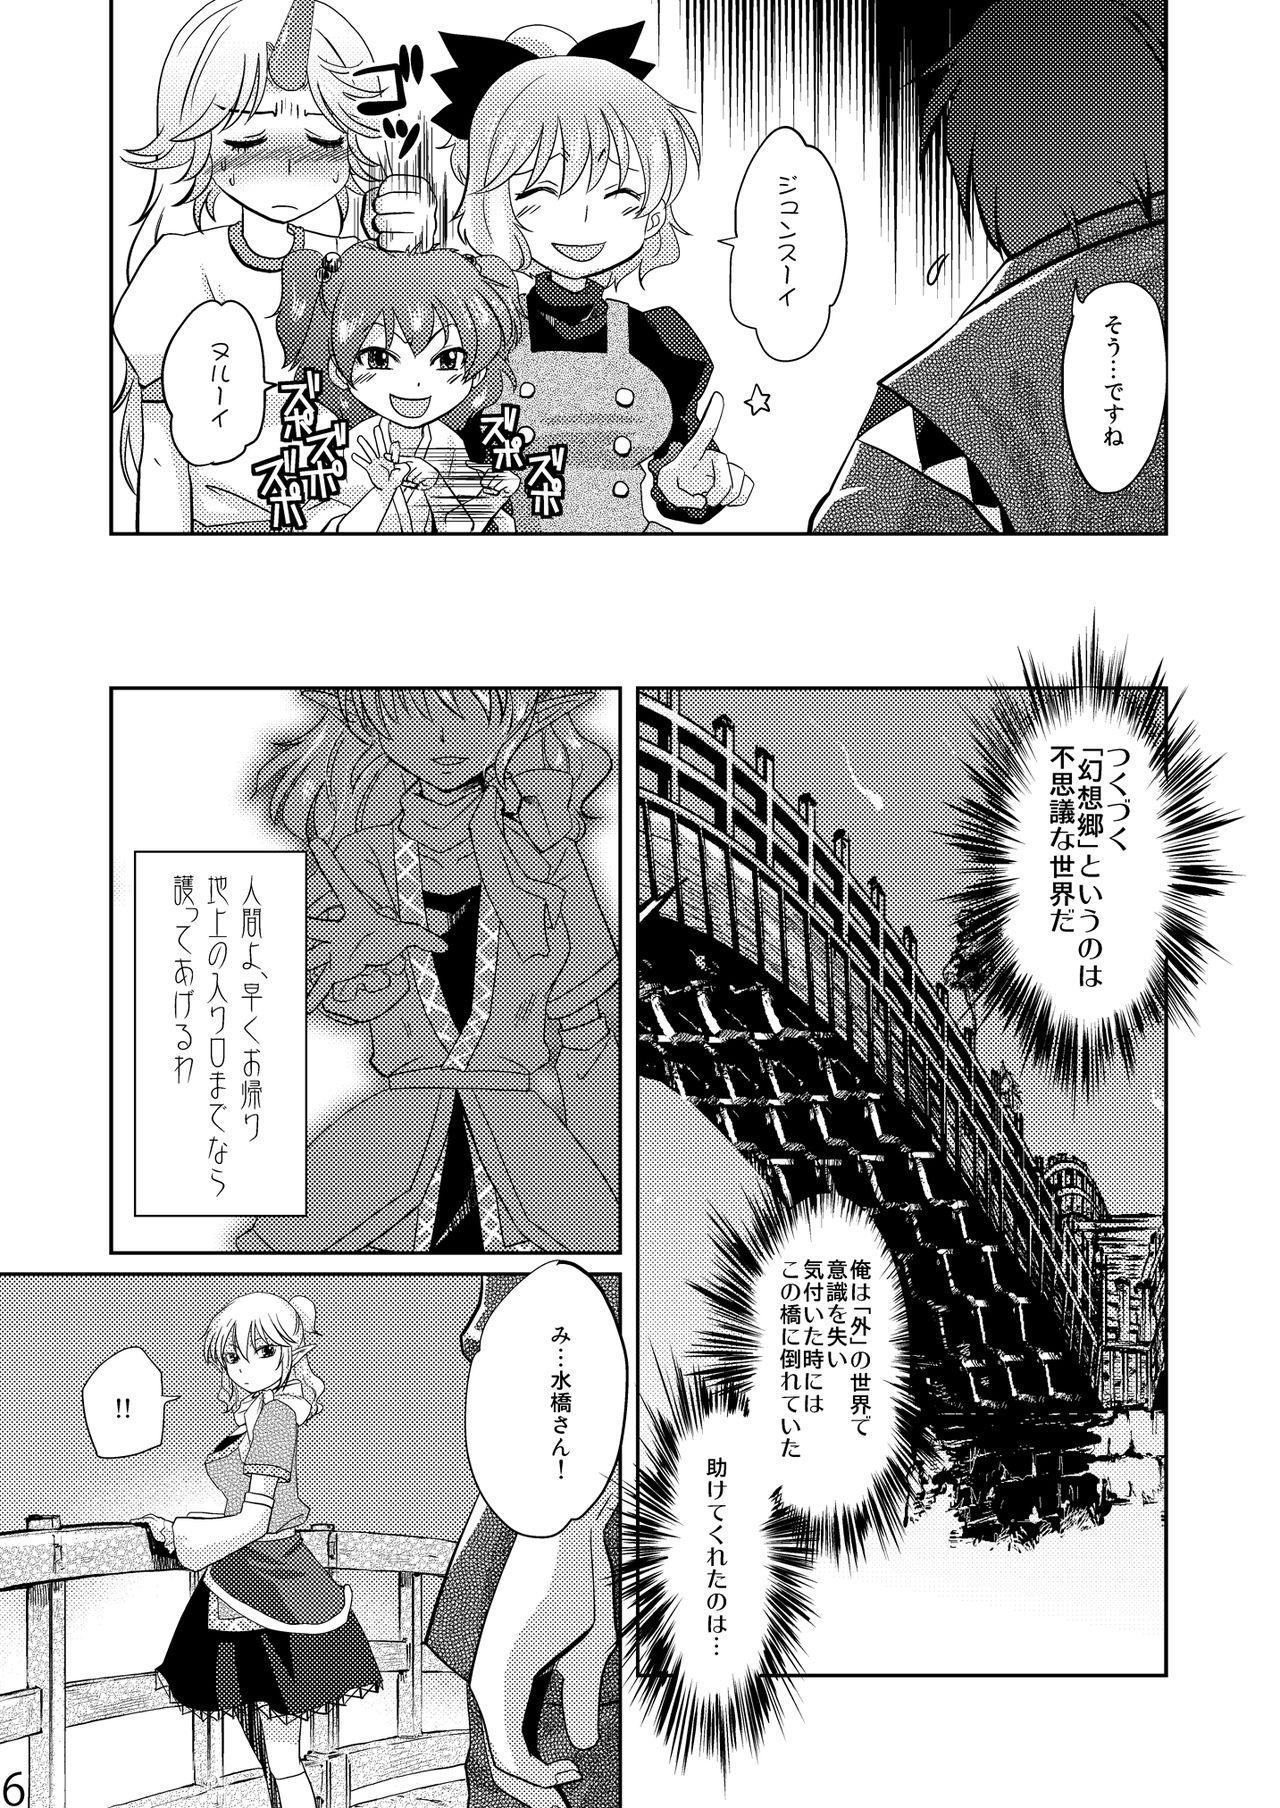 Punishment Opparusui - Touhou project Nena - Page 6